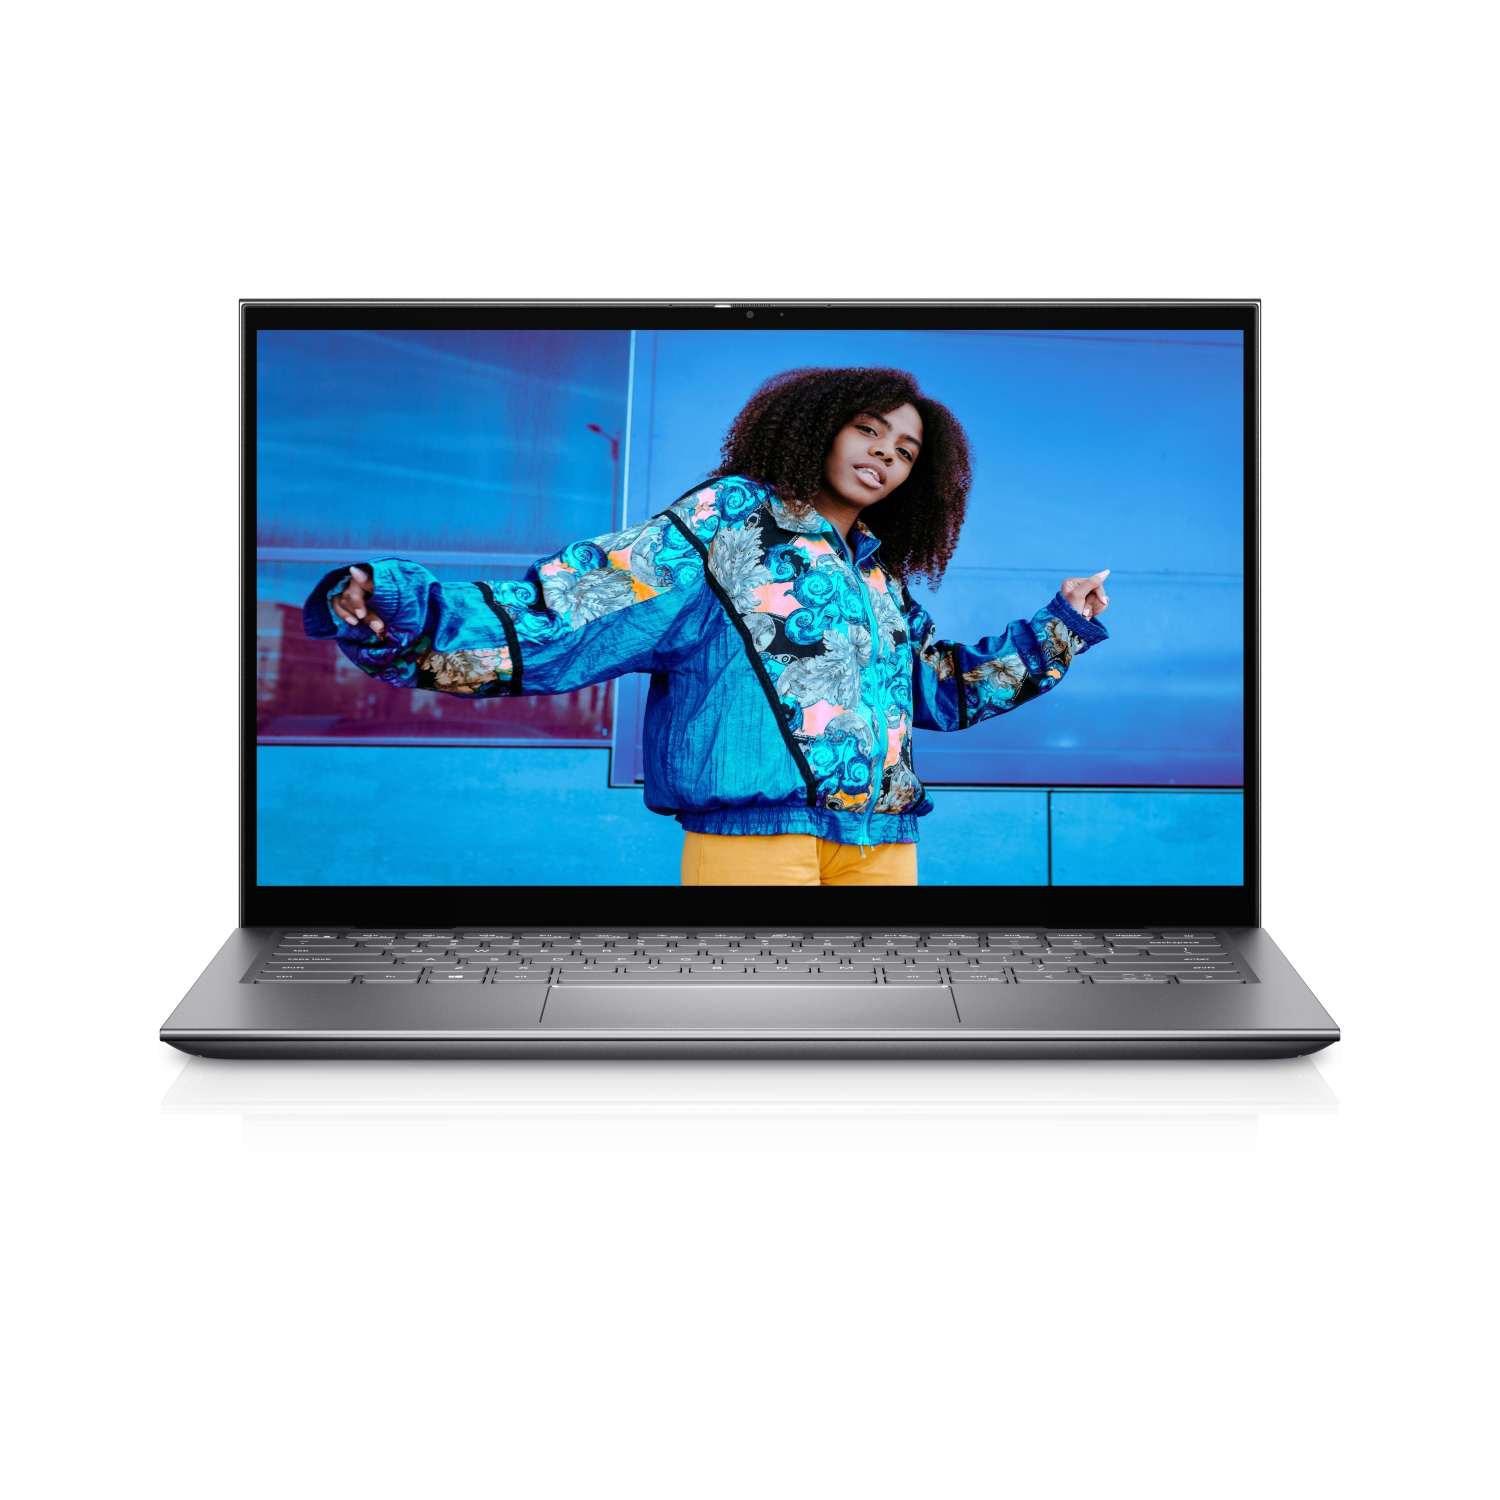 Refurbished (Excellent) – Dell Inspiron 5410 2-in-1 (2021) | 14" FHD Touch | Core i7 - 512GB SSD - 12GB RAM | 4 Cores @ 4.7 GHz - 11th Gen CPU